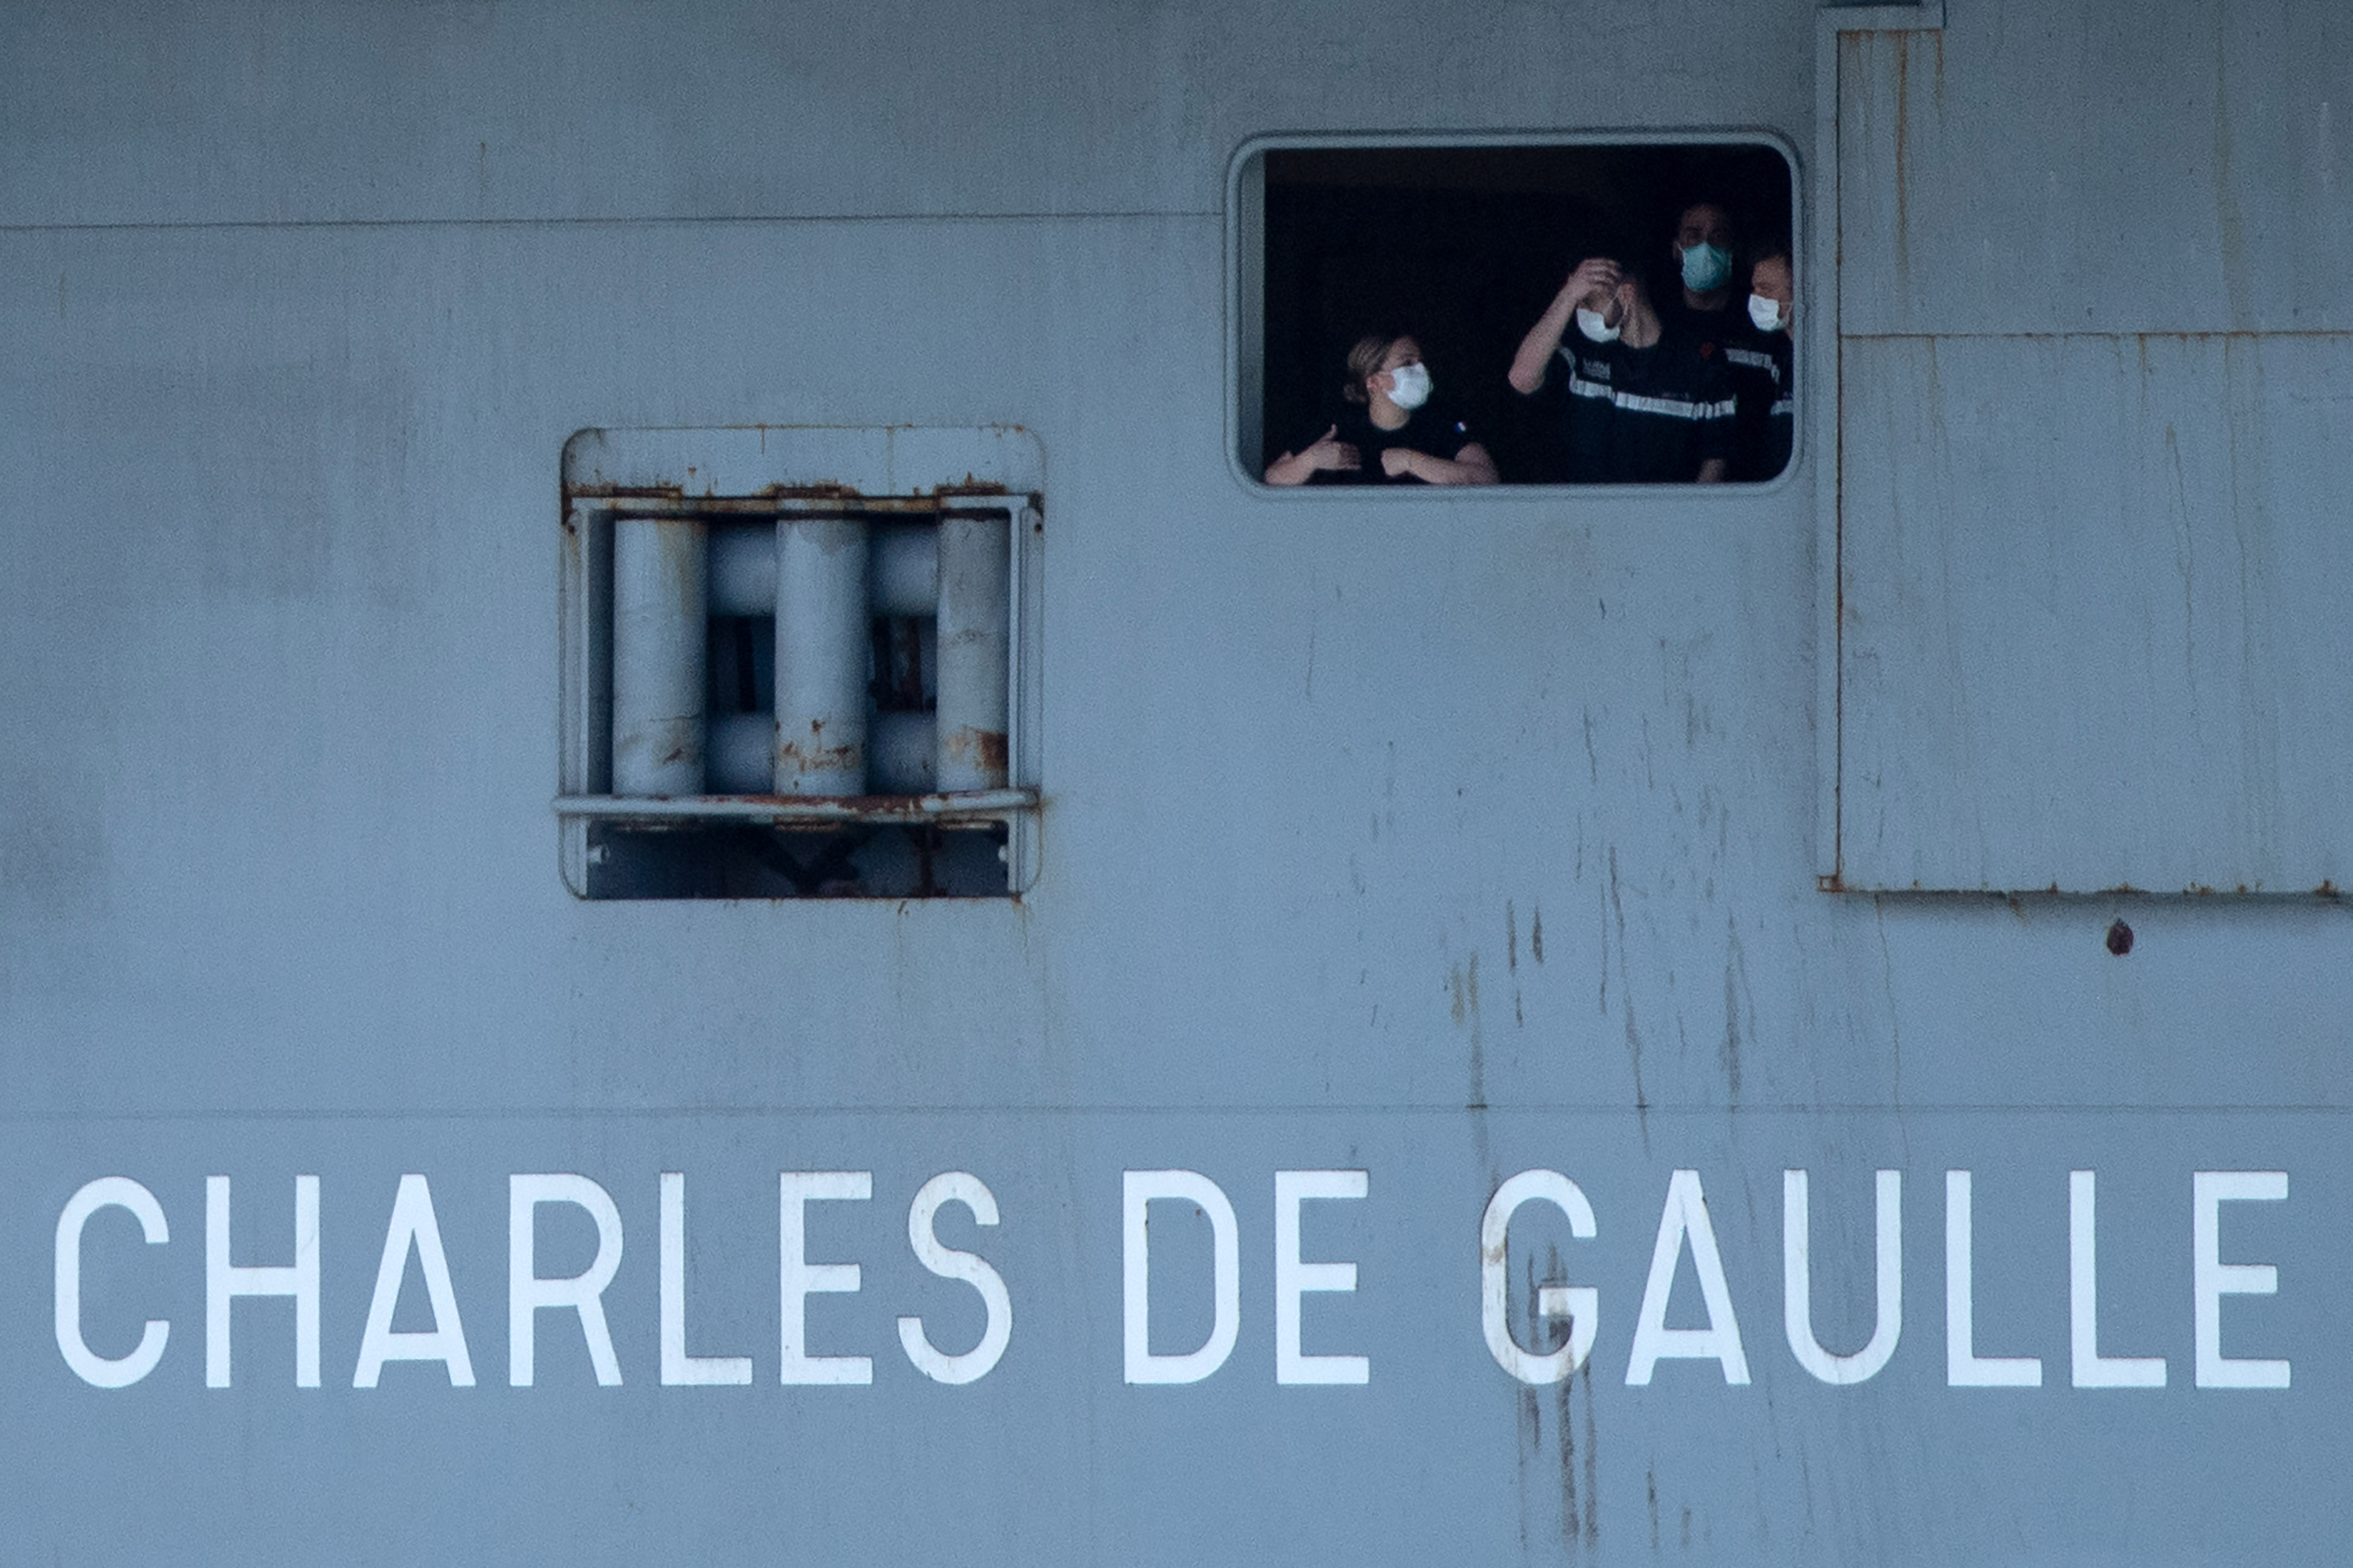 French navy soldiers stand onboard the French aircraft carrier the Charles de Gaulle as it arrives in the southern port of Toulon in France on April 12.